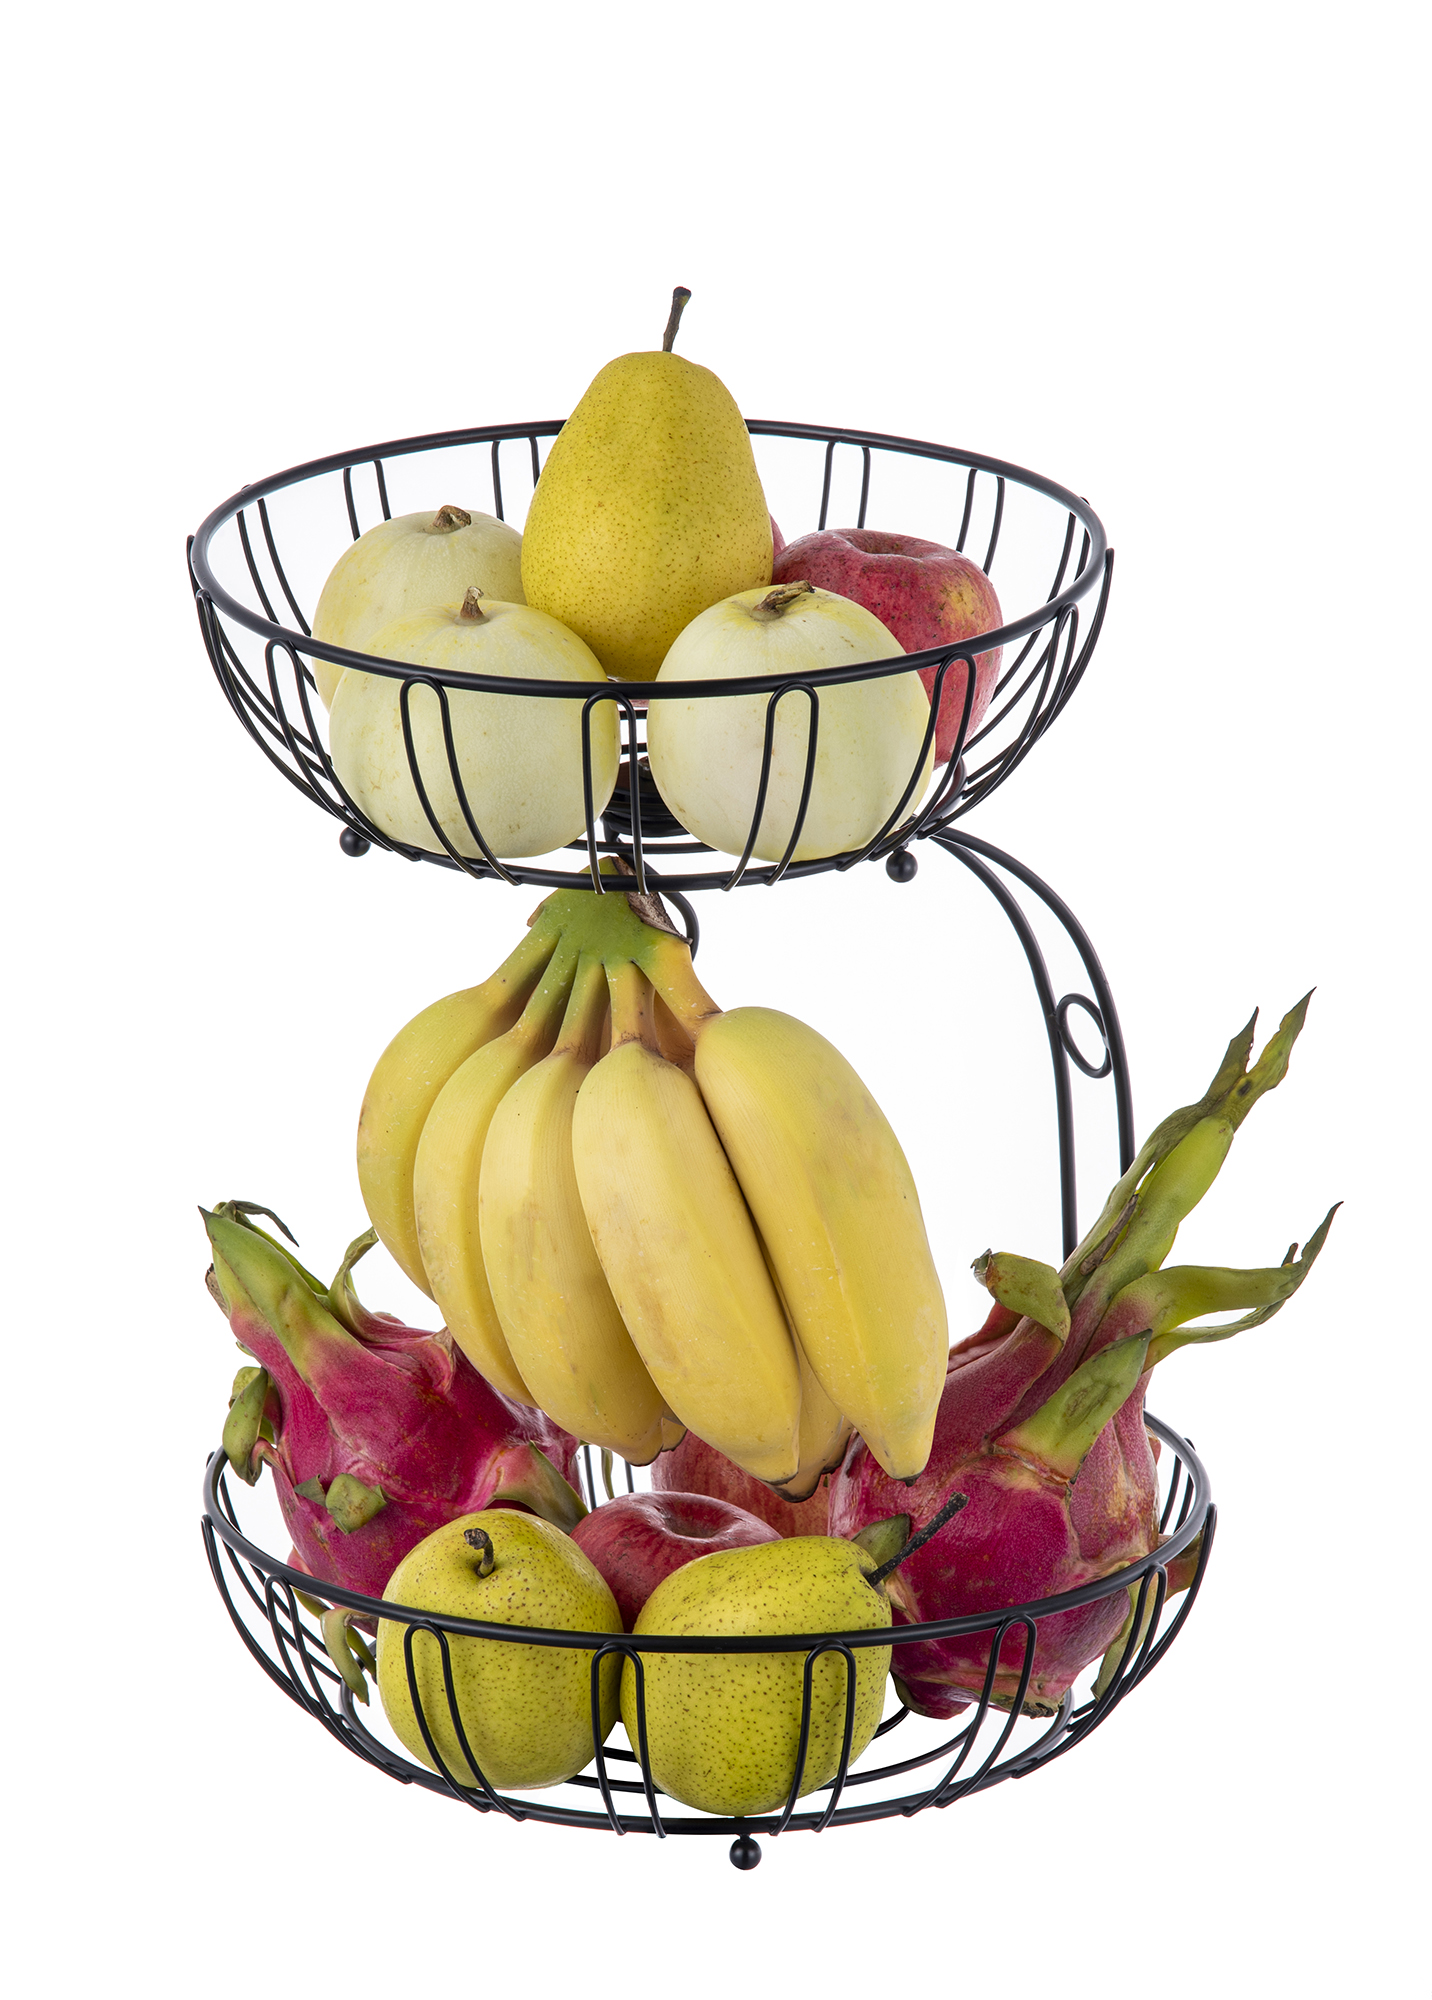 Double-layer fruit basket with banana.MP4